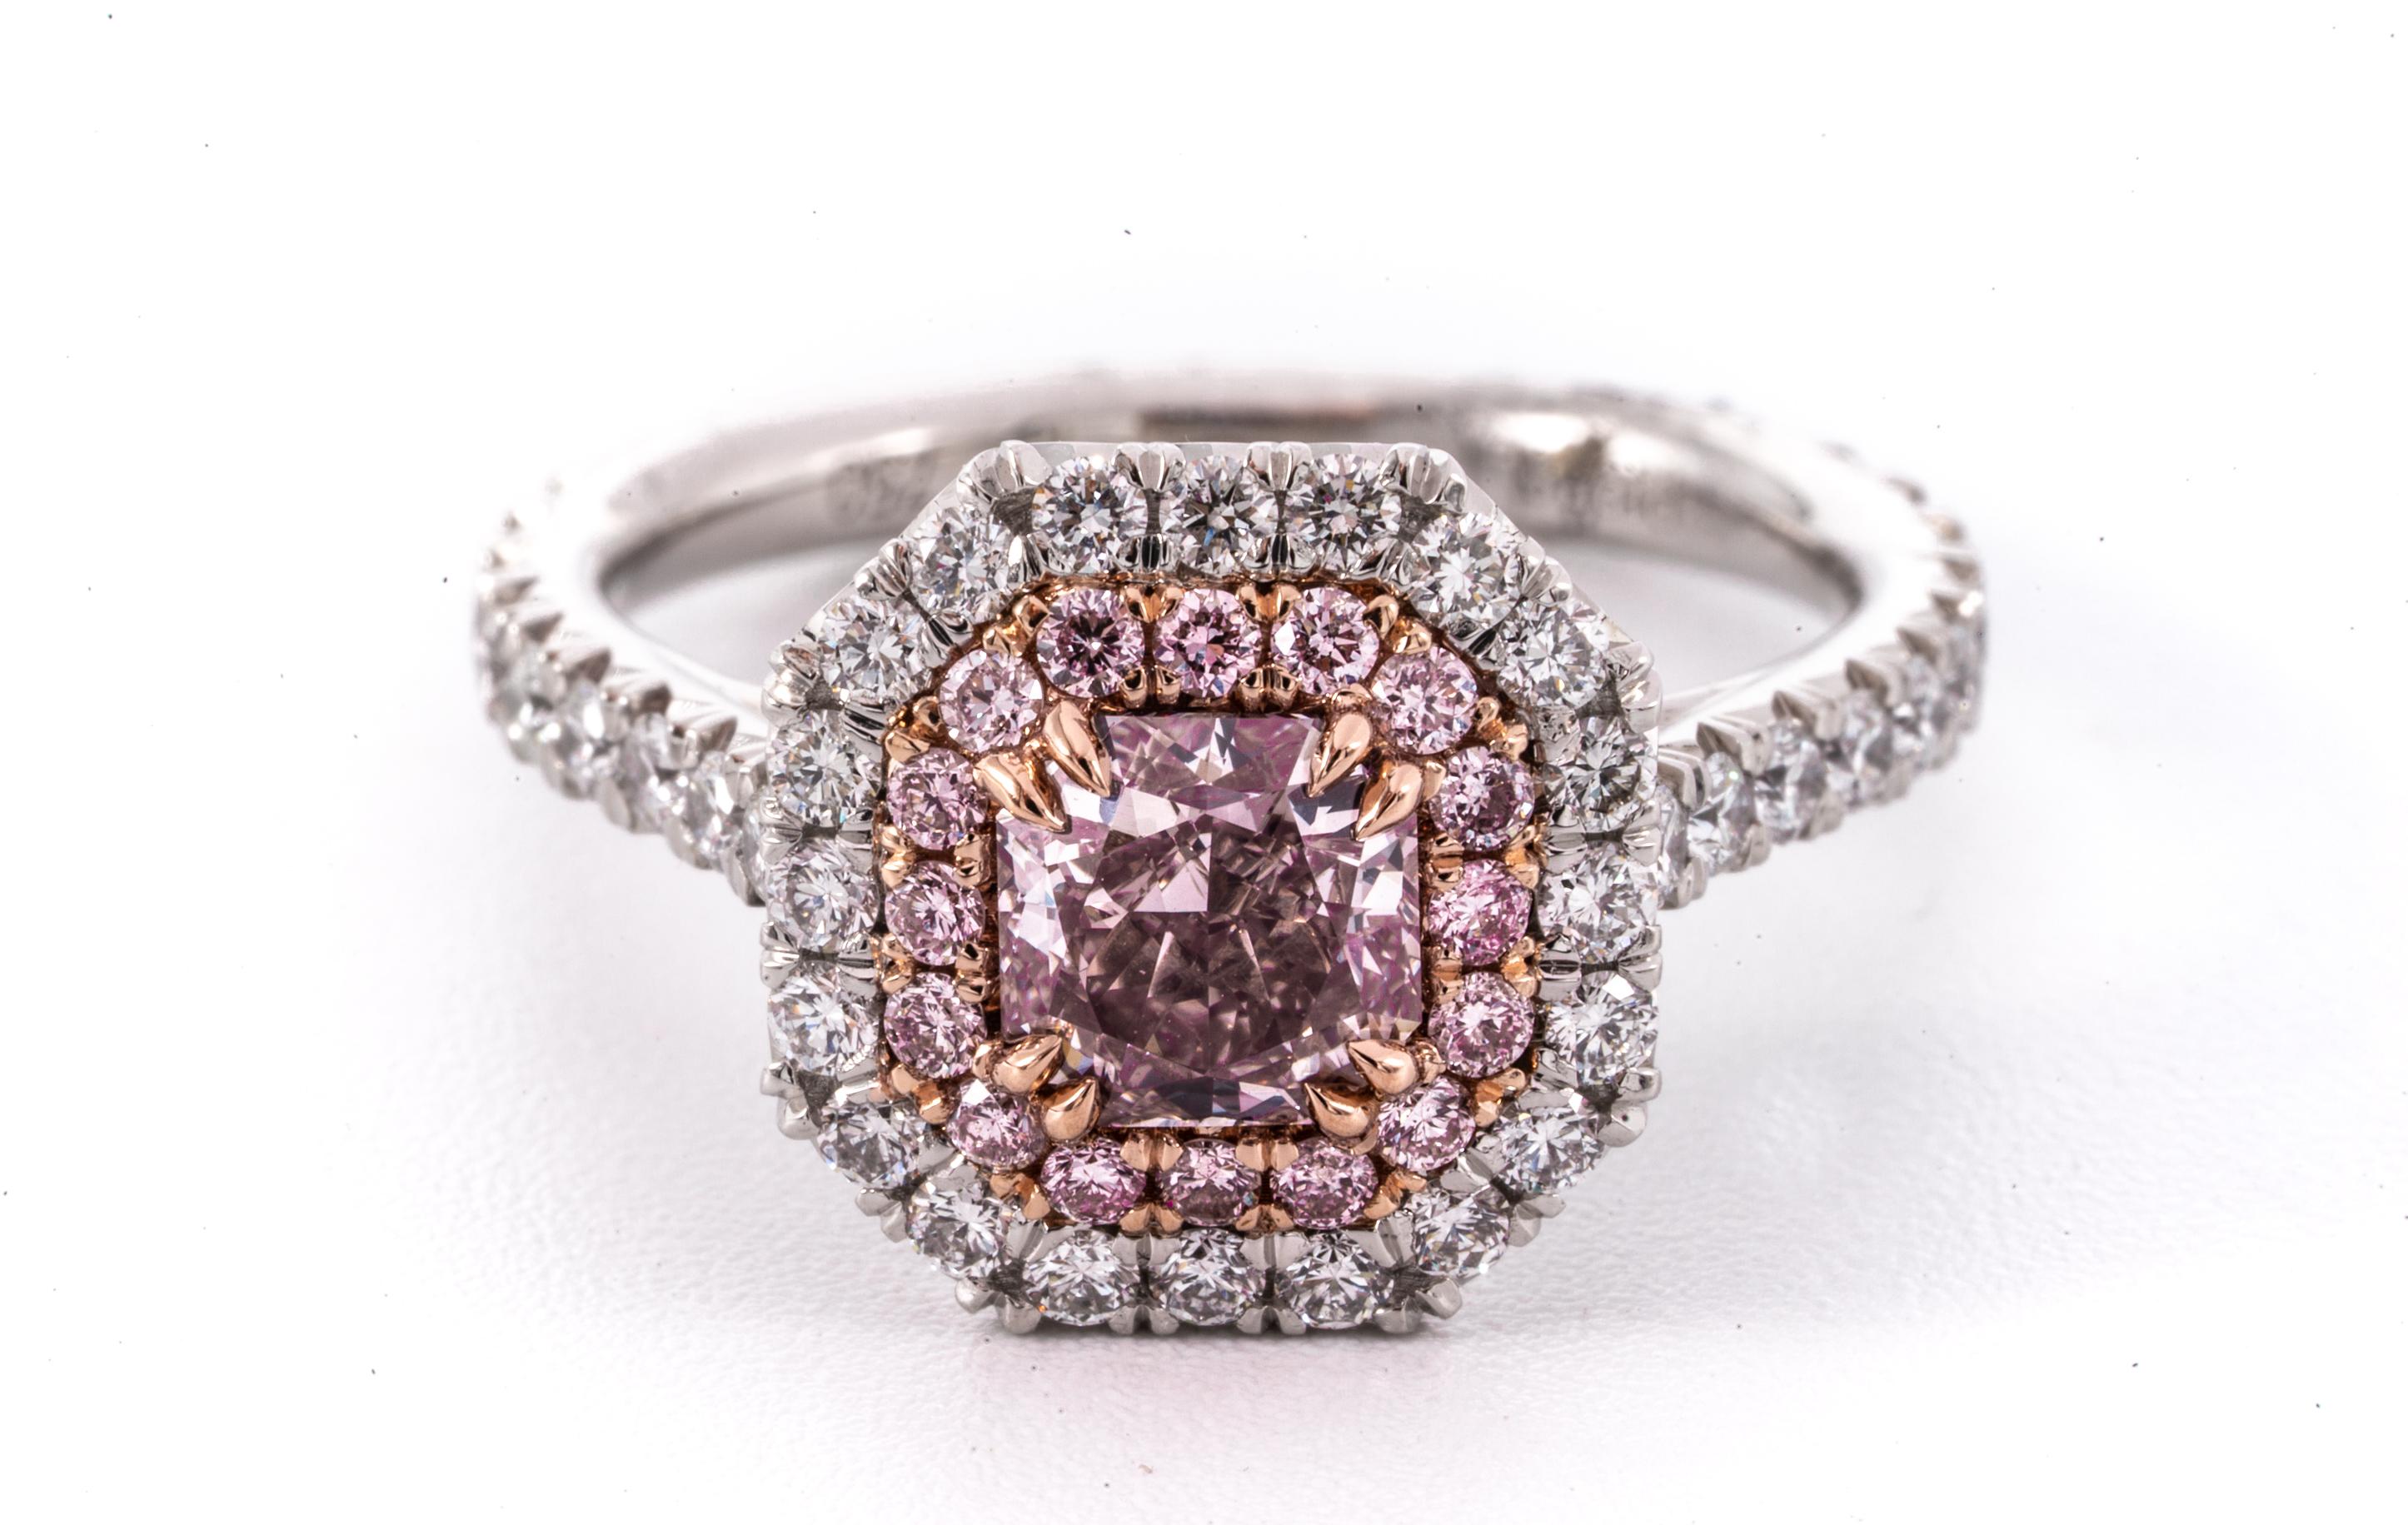 .91 Carat Fancy brownish Pink Radiant Cut Diamond Ring , VS2 Clarity
GIA Grading report Included ( # 1186855138 ) 
Ring is highlighted with  16 natural pink diamonds weighing .21 carats total , along with 58 white diamonds weighing .89 carats total